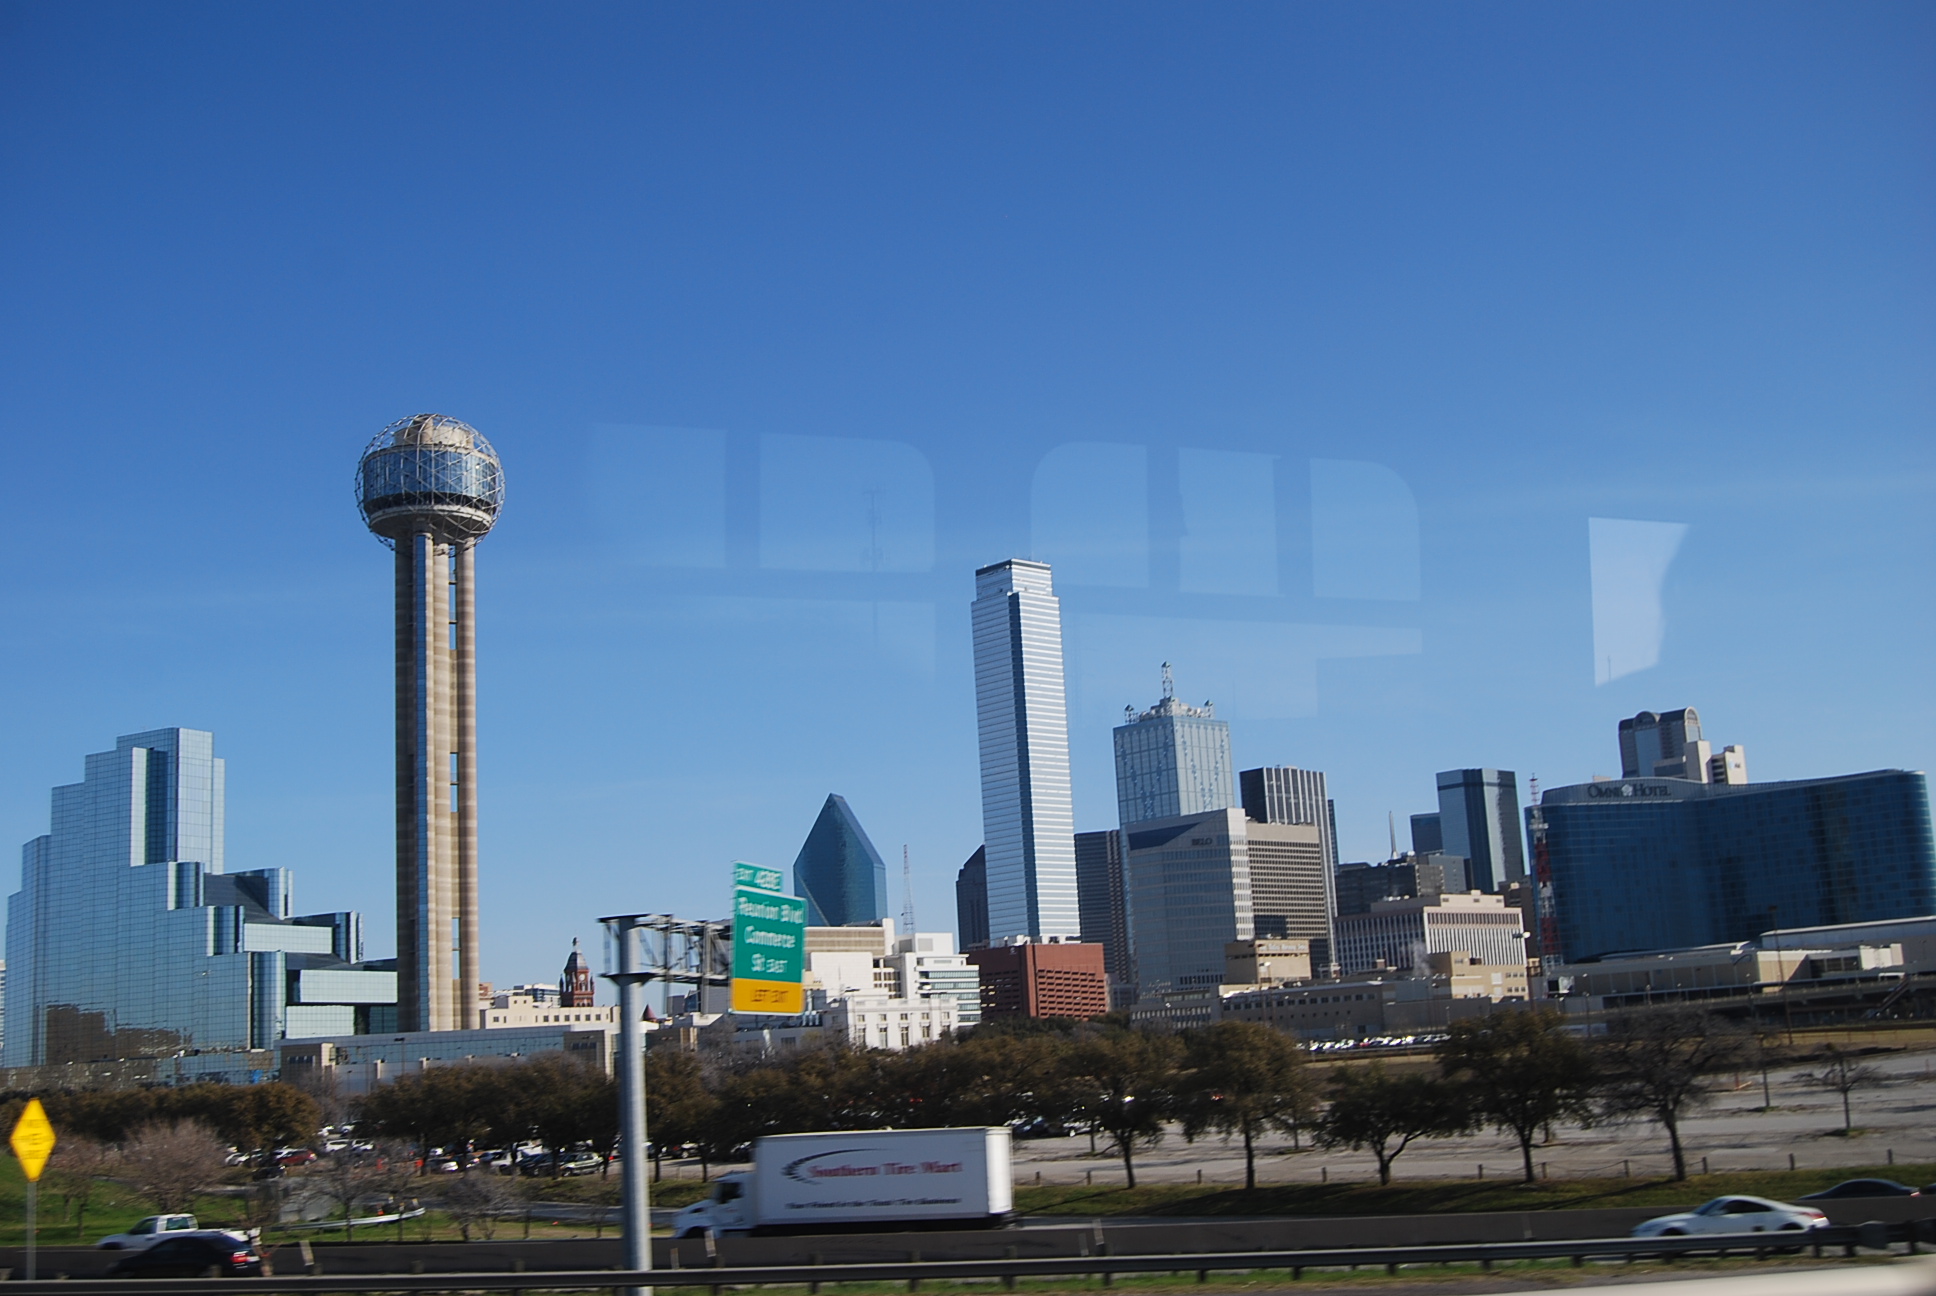 Pin Dallas texas skyline hd travel photos and wallpapers